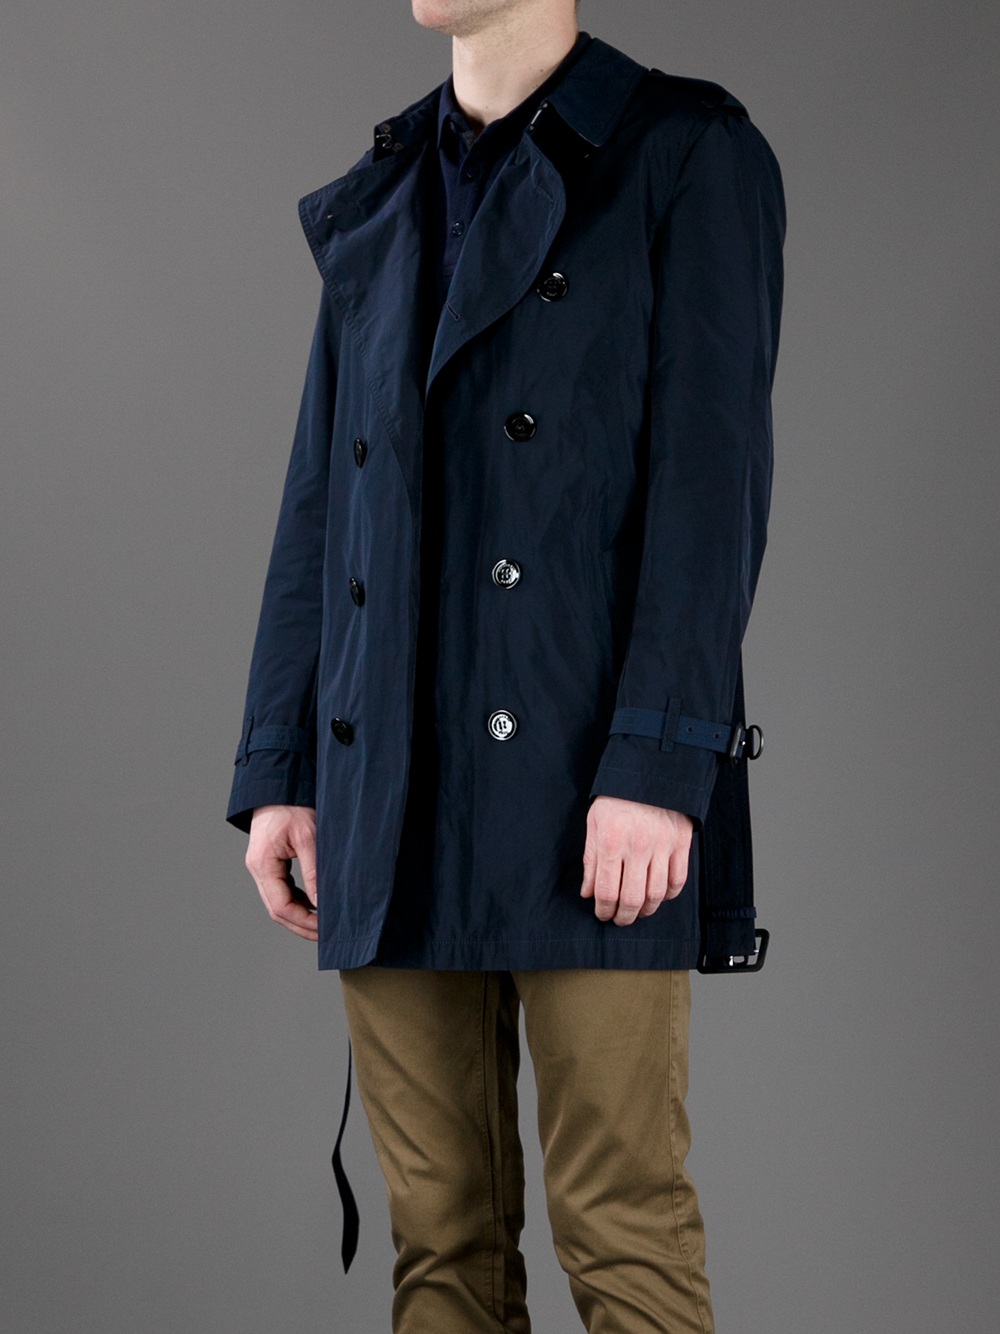 Burberry Brit Britton Trench Coat in Navy (Blue) for Men - Lyst